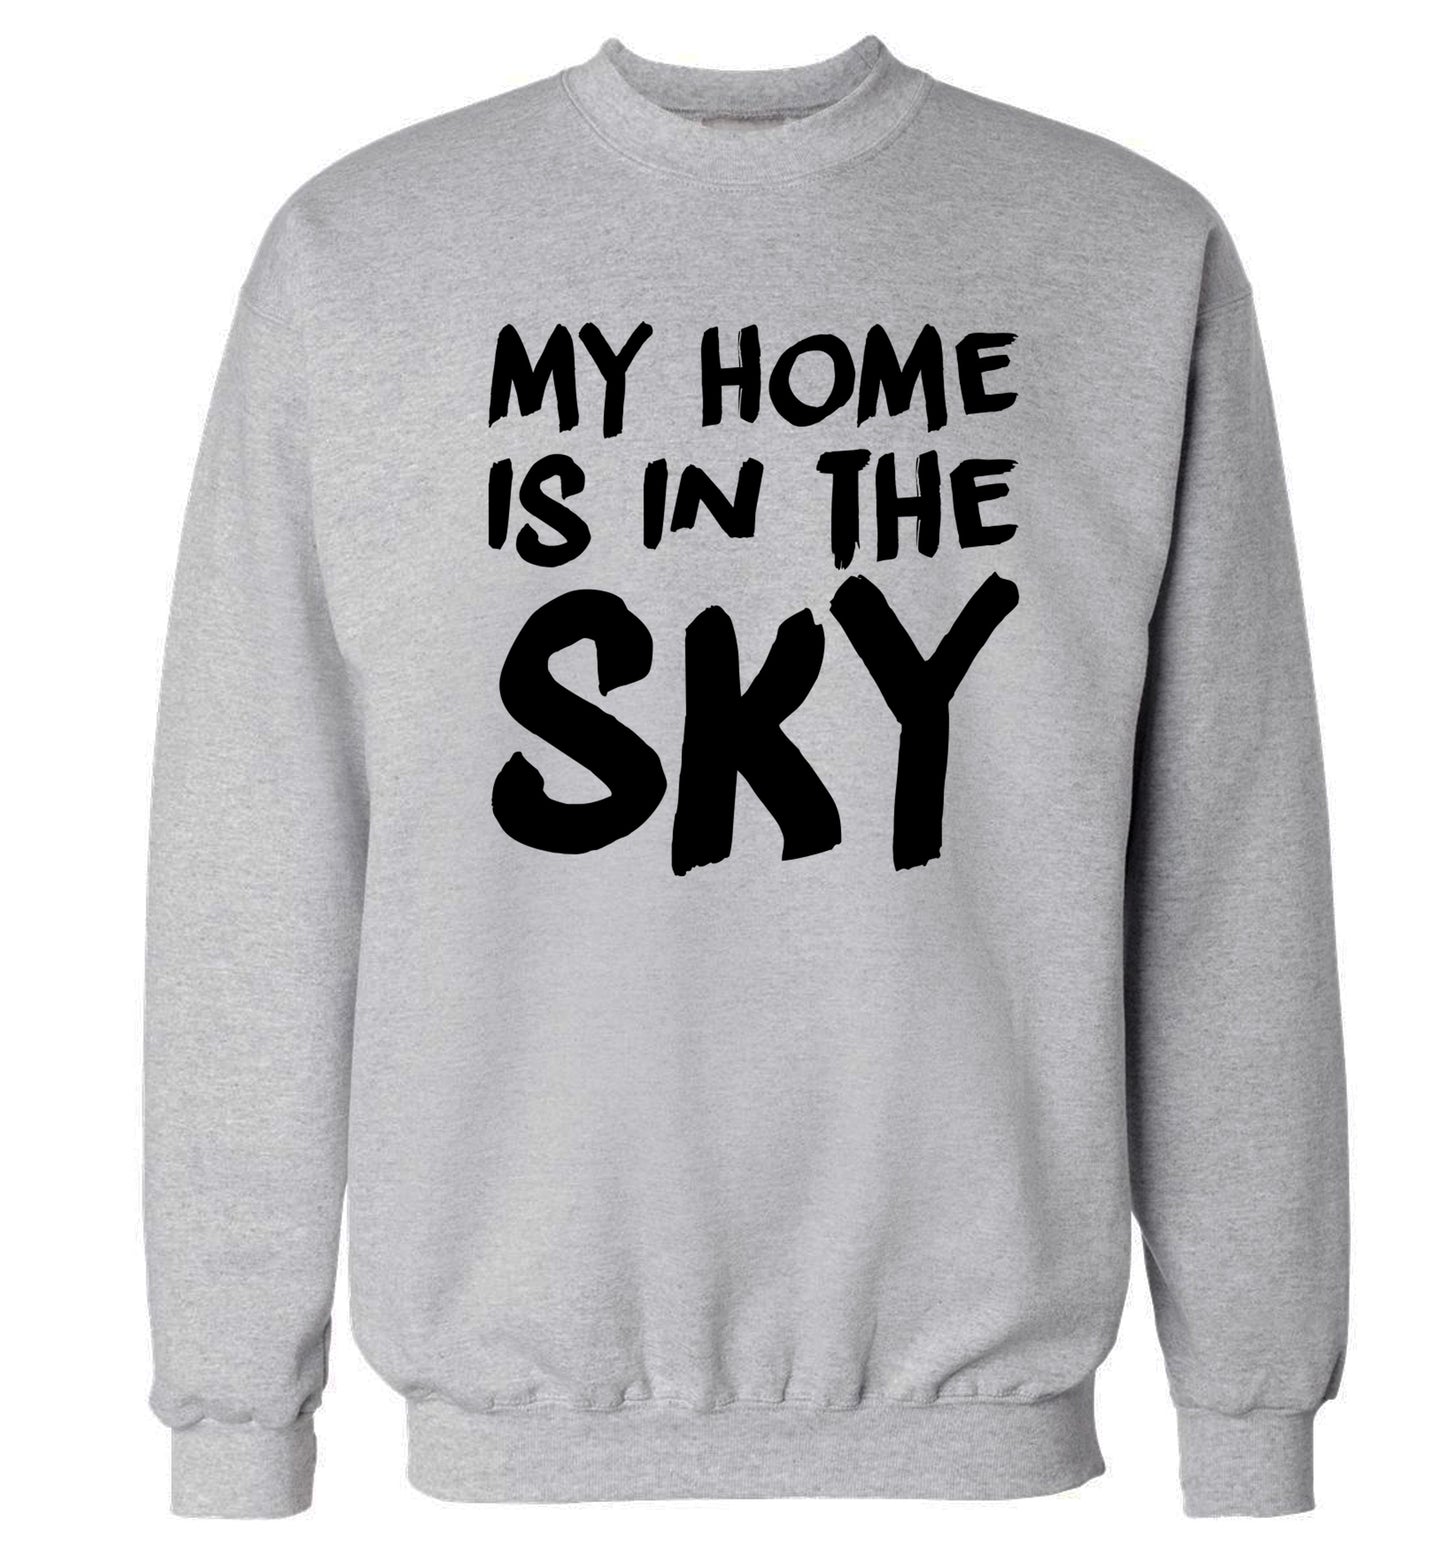 My home is in the sky Adult's unisex grey Sweater 2XL